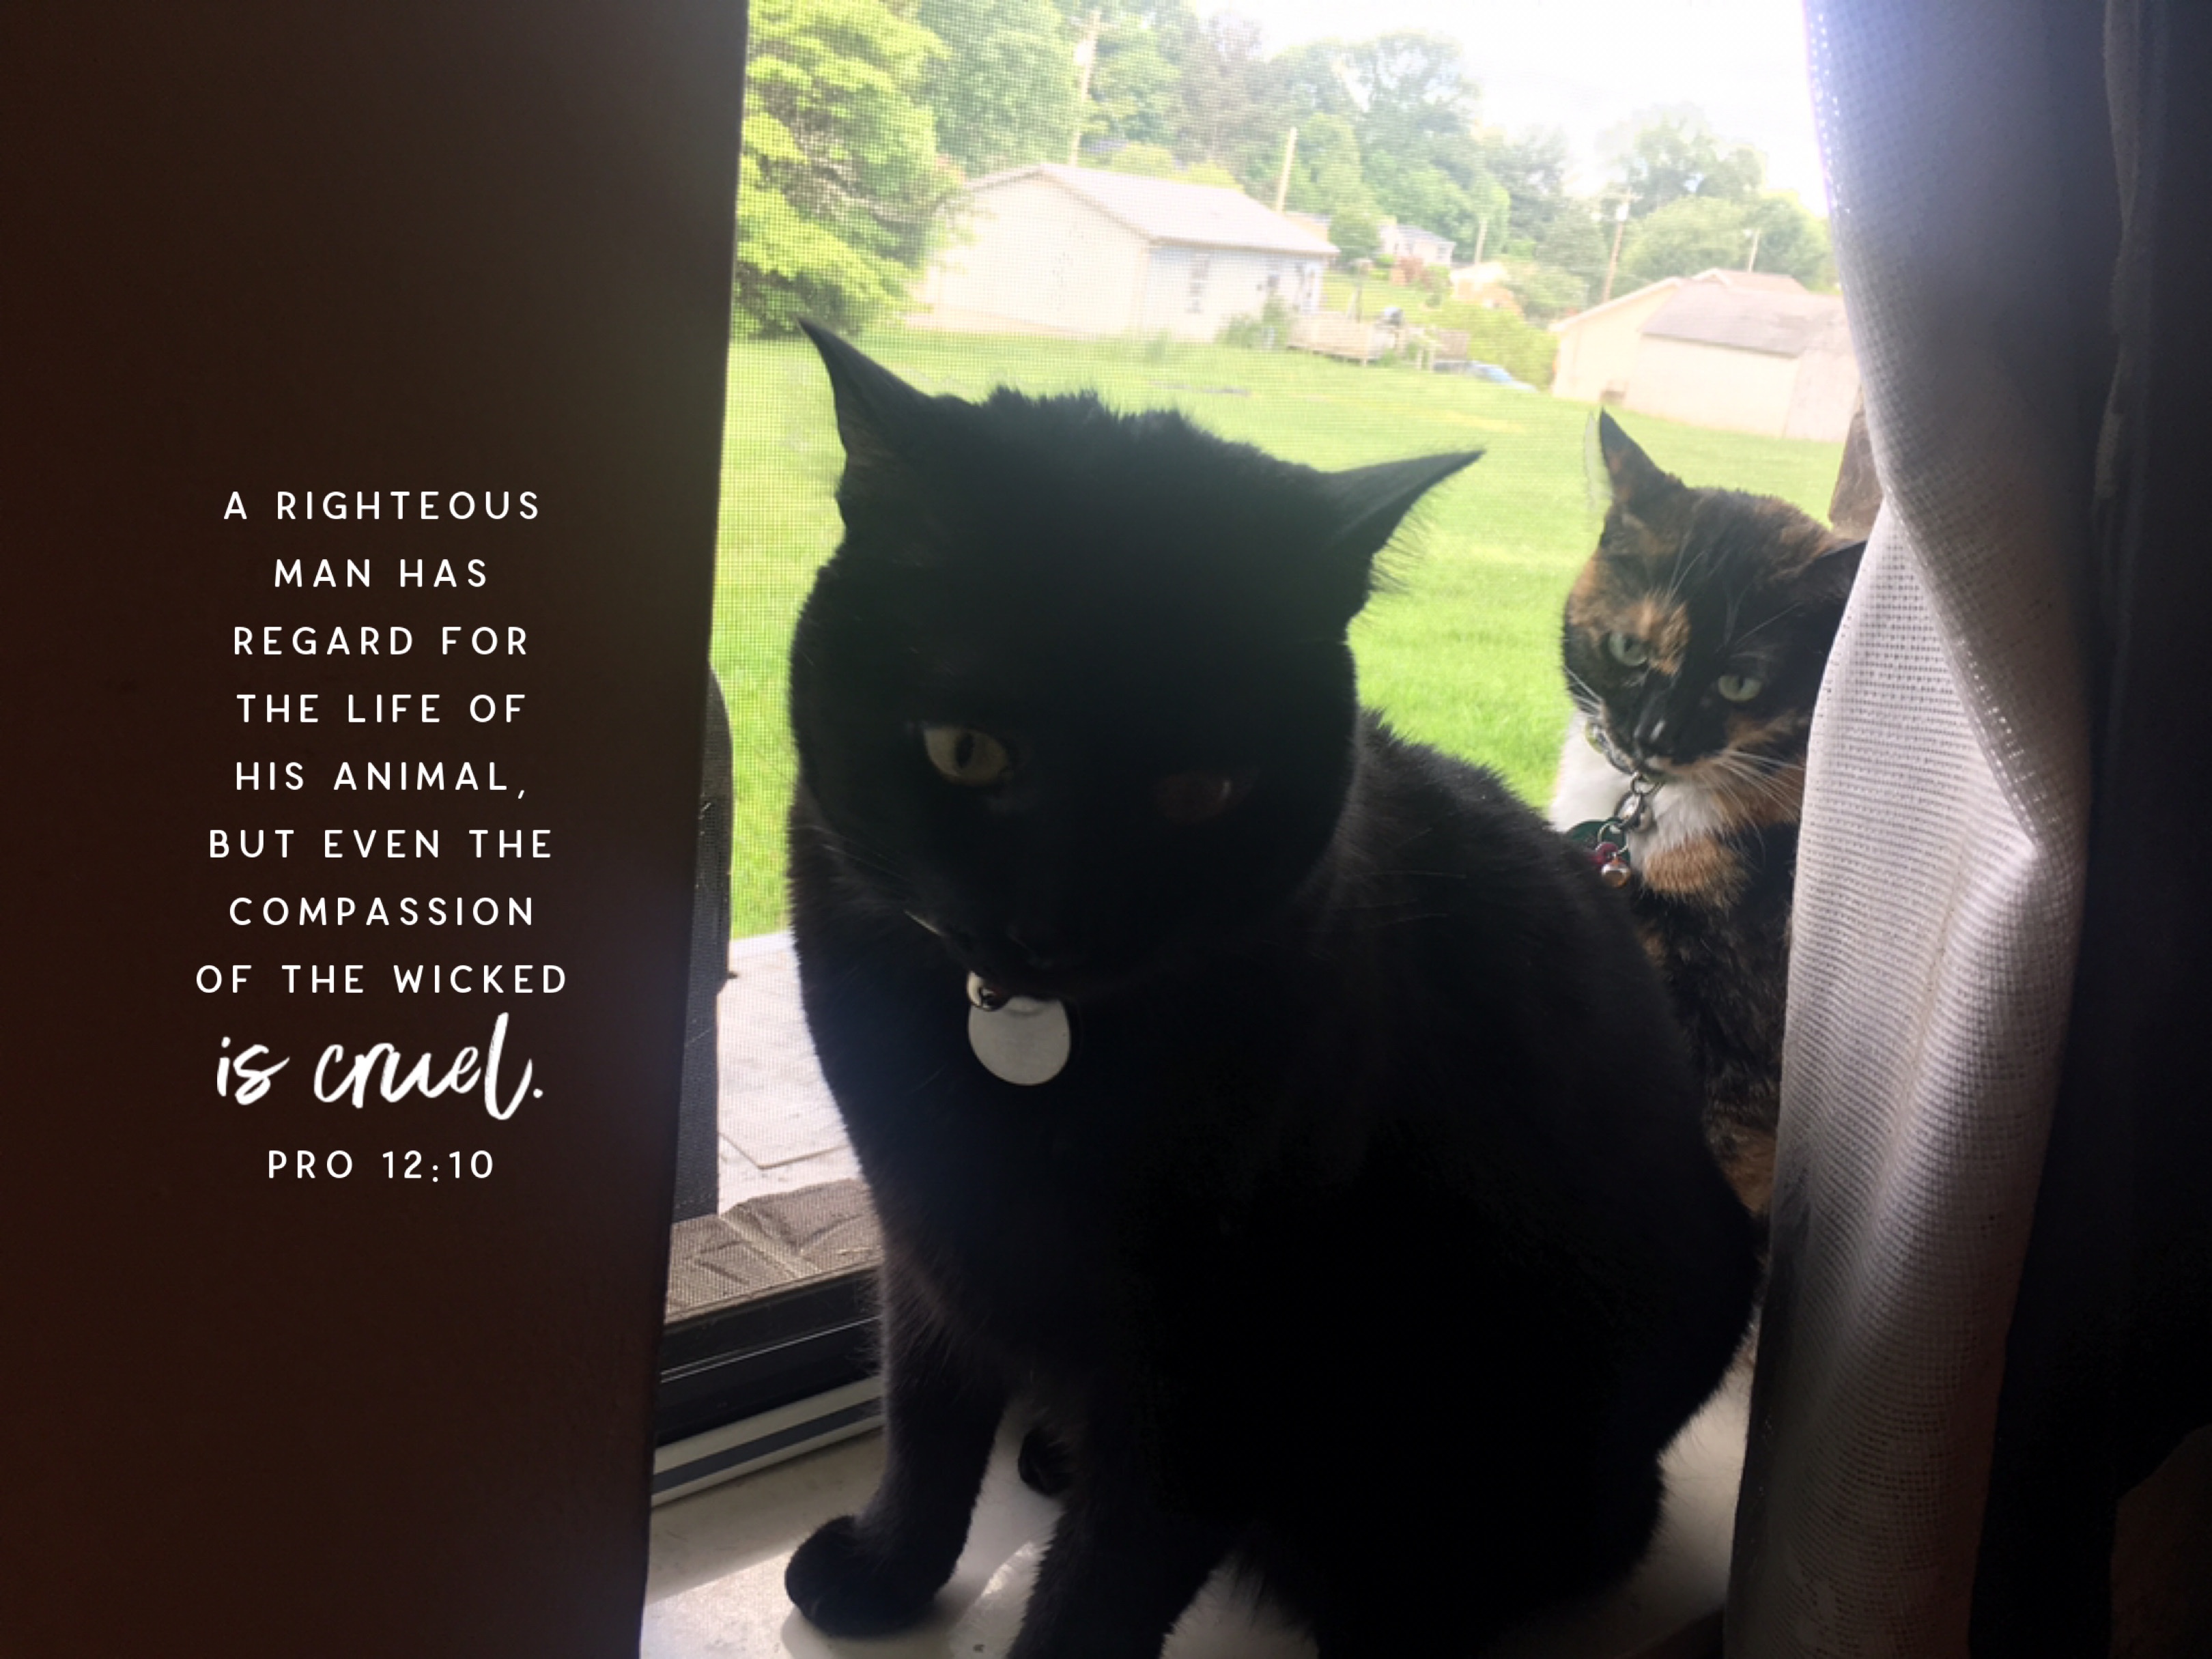 VOTD November 30 - “A righteous man has regard for the life of his animal, But even the compassion of the wicked is cruel.”  ‭‭Proverbs‬ ‭12:10‬ ‭NASB‬‬ Pictured is Joel the Brave and Lilly Bug of 2 Cats and a Blog. 